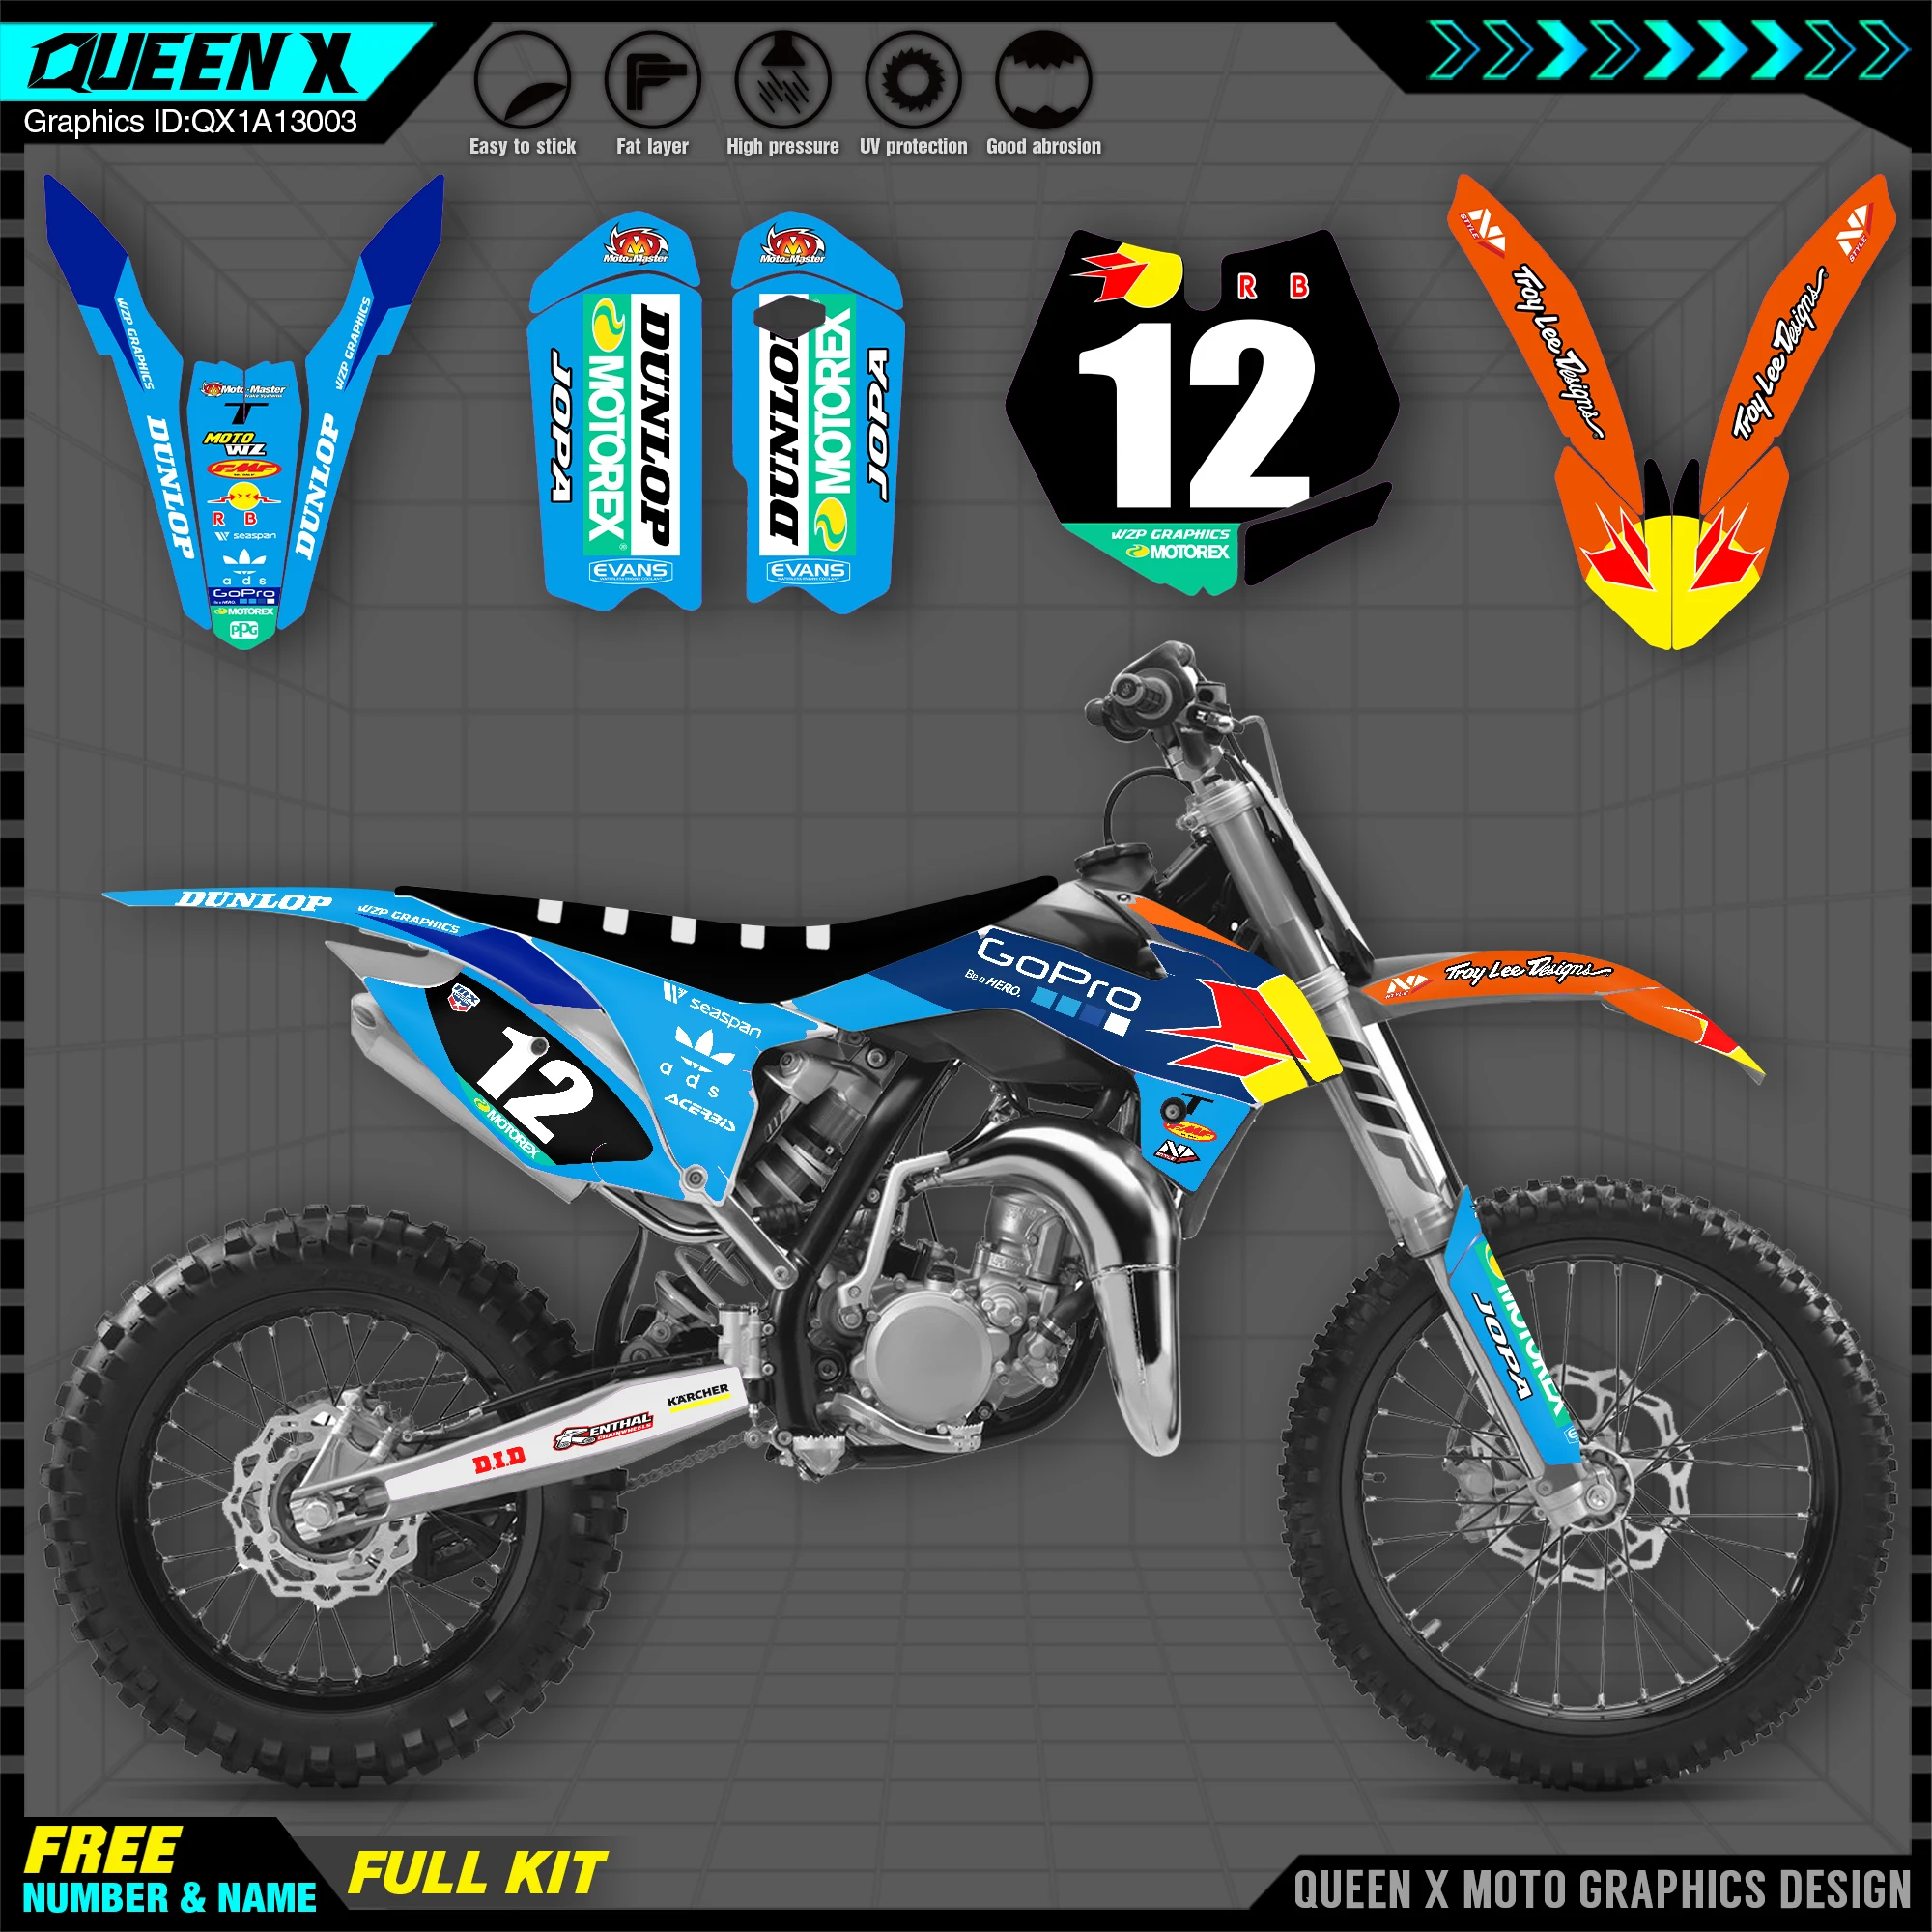 NEW Team QUEEN X MOTOR GRAPHICS & BACKGROUND DECAL STICKER Kits Fit for KTM SX 85 SX85 2013 2014 2015 2016 2017